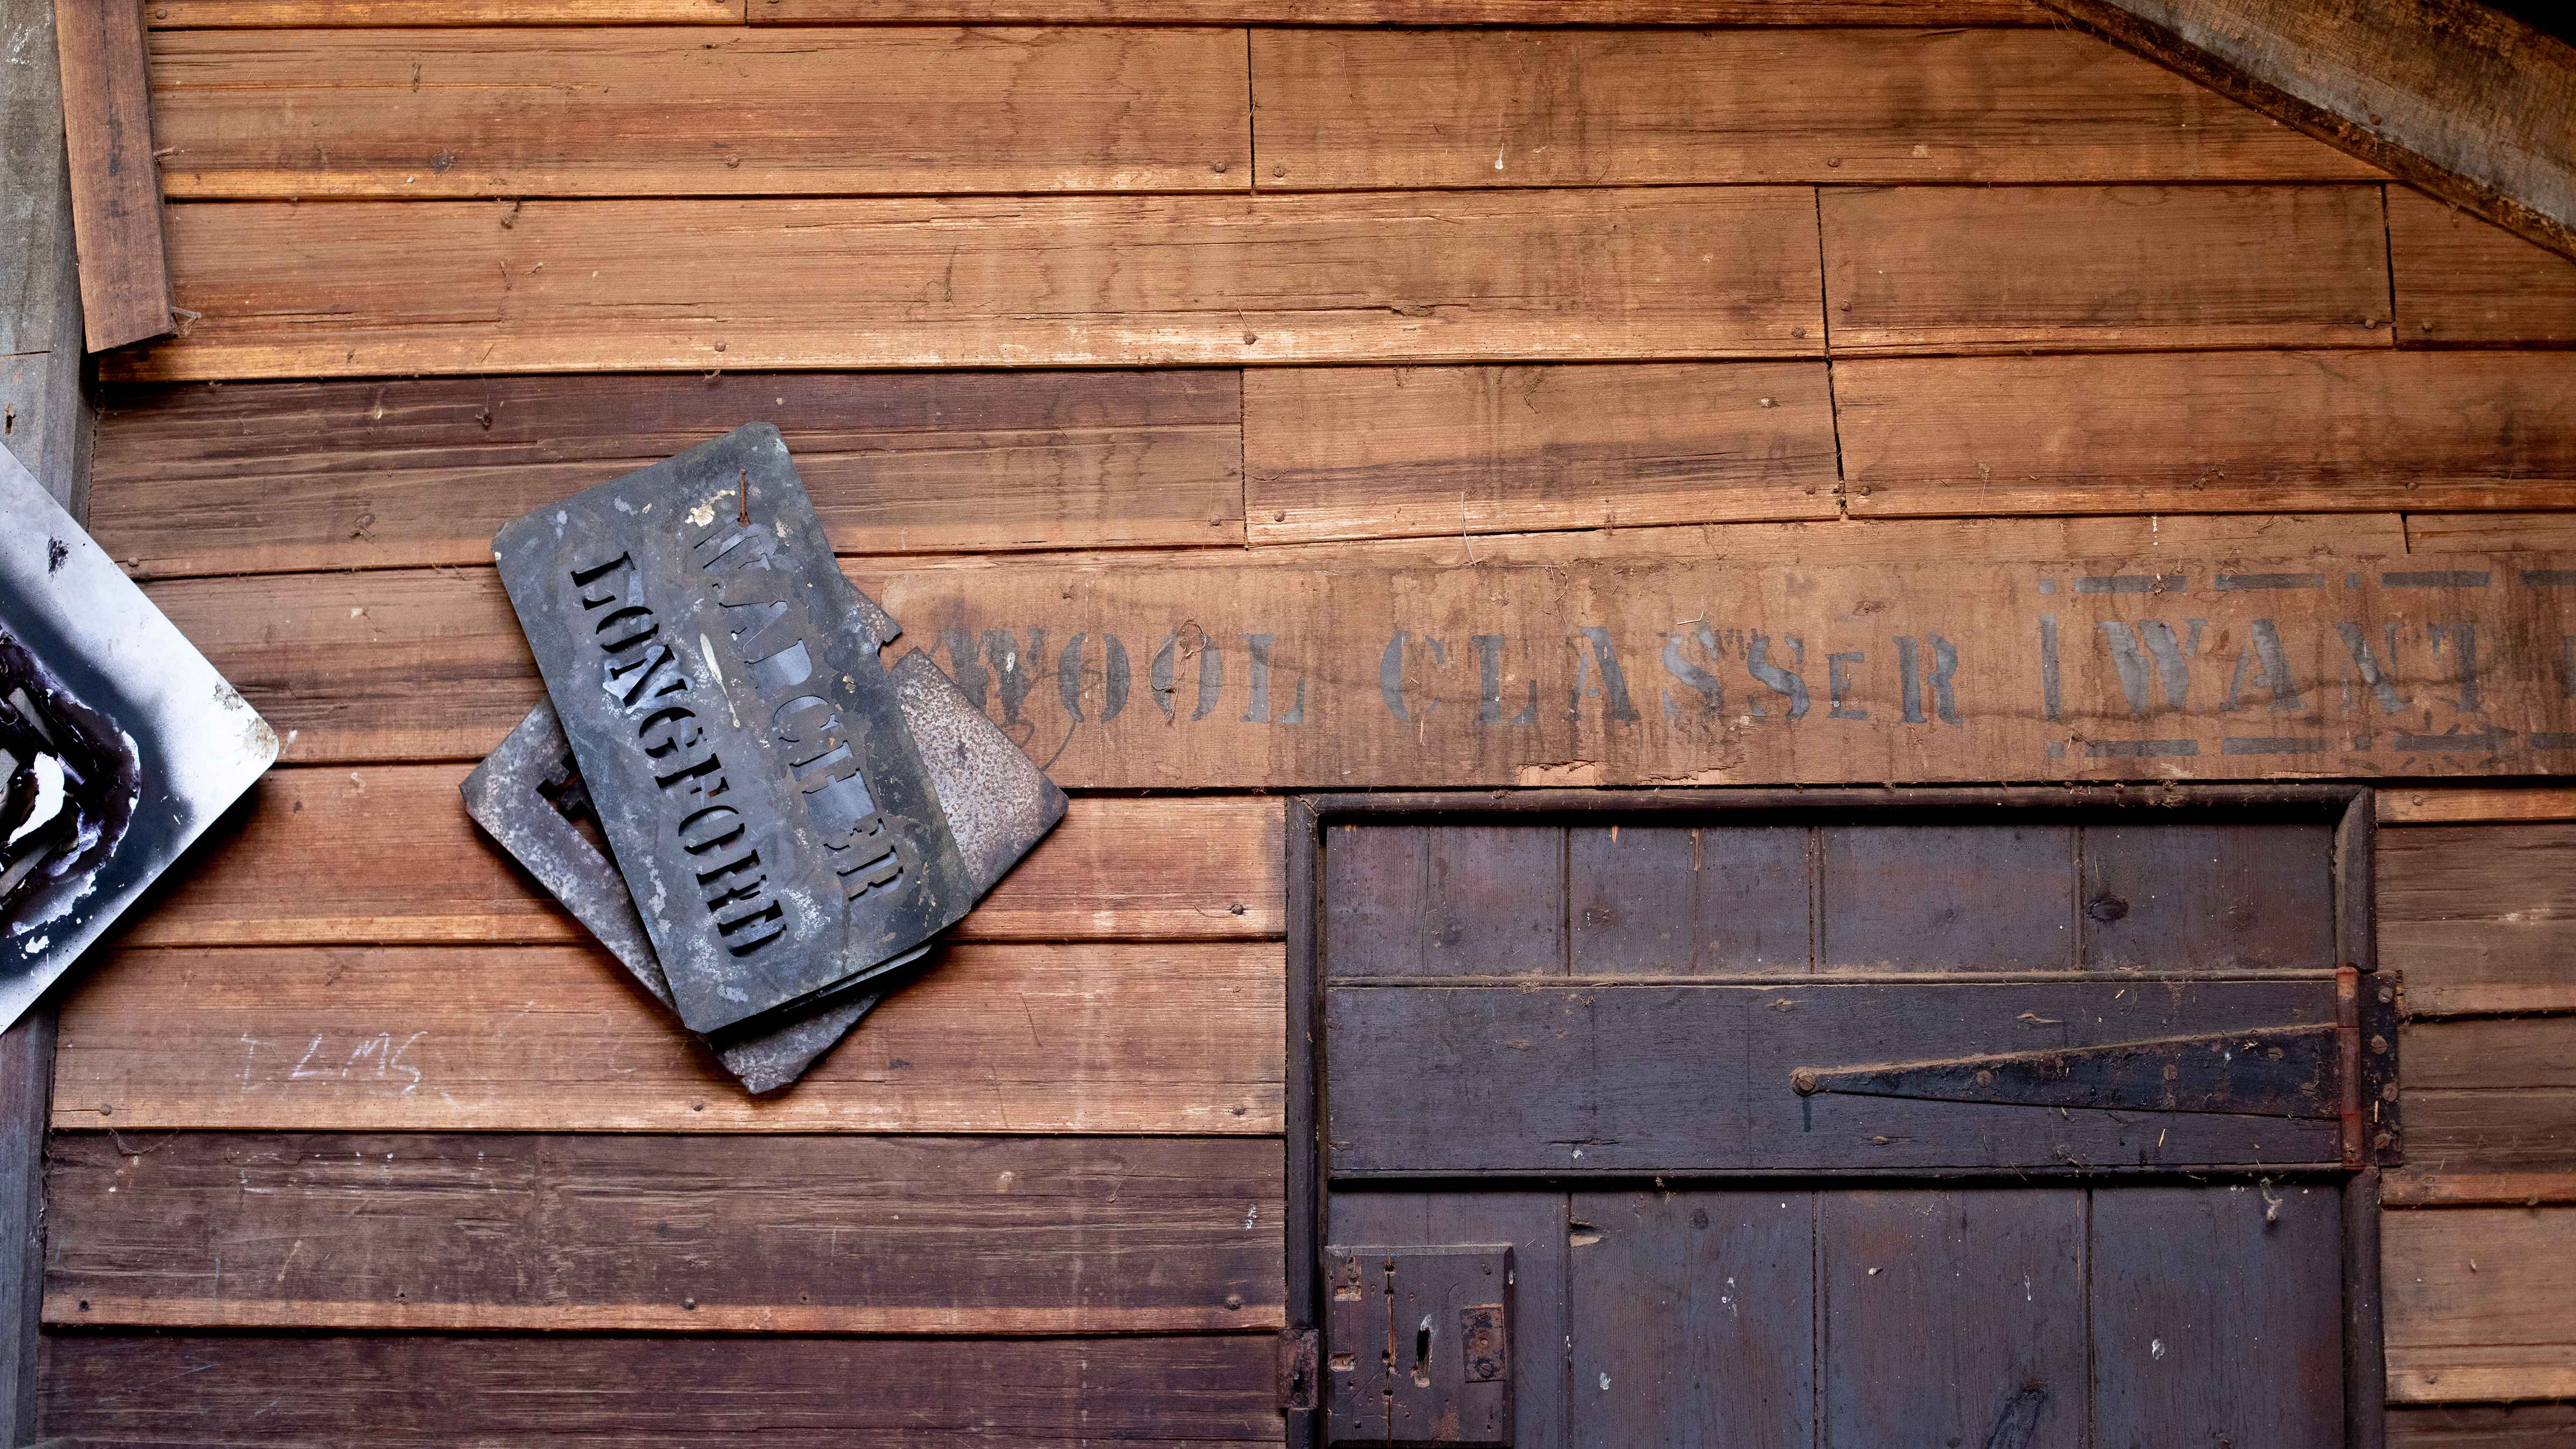 Metal wool brands with the wording ‘LONGFORD’ hang from a nail on a horizontal timber wall. A timber door with old fashioned hinges is also in the picture. Some printed words saying ‘WOOL CLASSER WA’ are on the wall in black paint. Photo: Kieran Bradley.